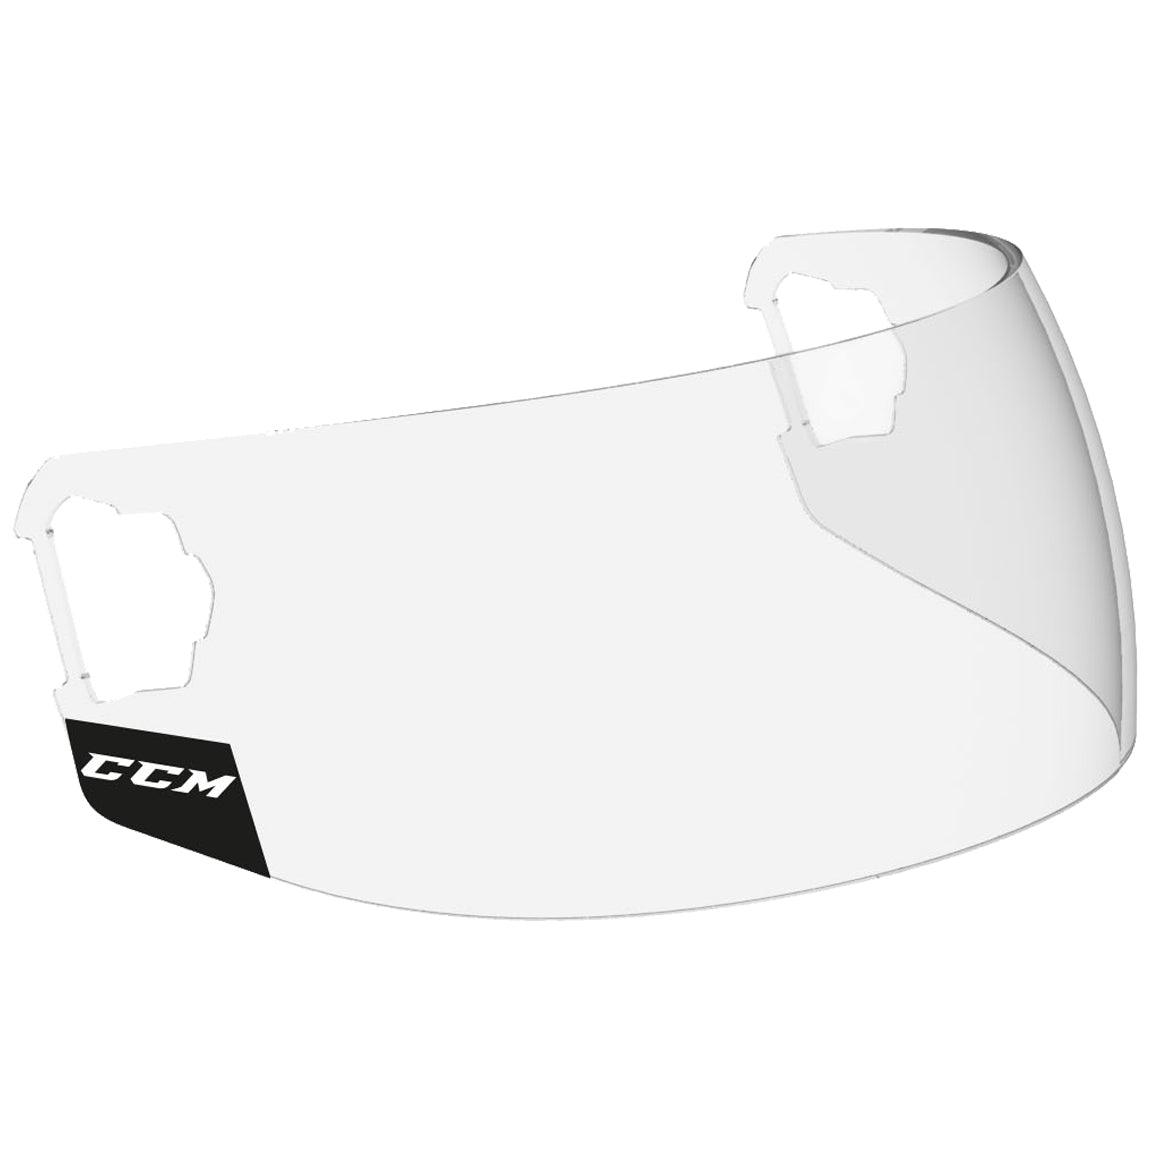 Visor Straight Certified With Fast - Clip - Senior - Sports Excellence